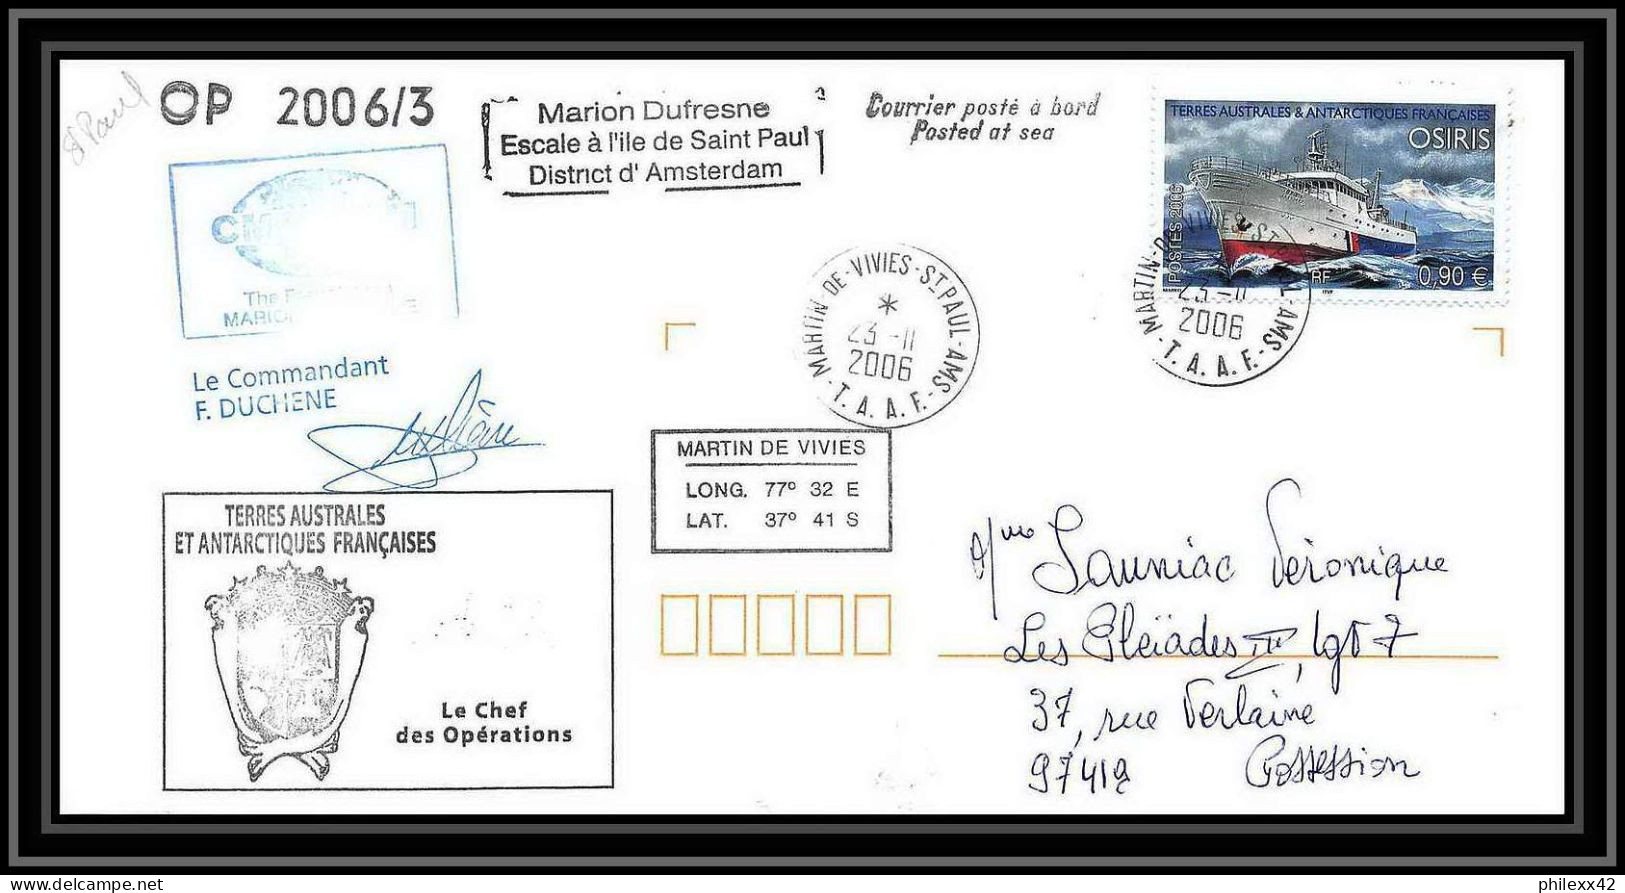 2618 ANTARCTIC Terres Australes TAAF Lettre Cover Dufresne 2 Signé Signed Op 2006/3 N°442 23/11/2006 St Paul - Spedizioni Antartiche